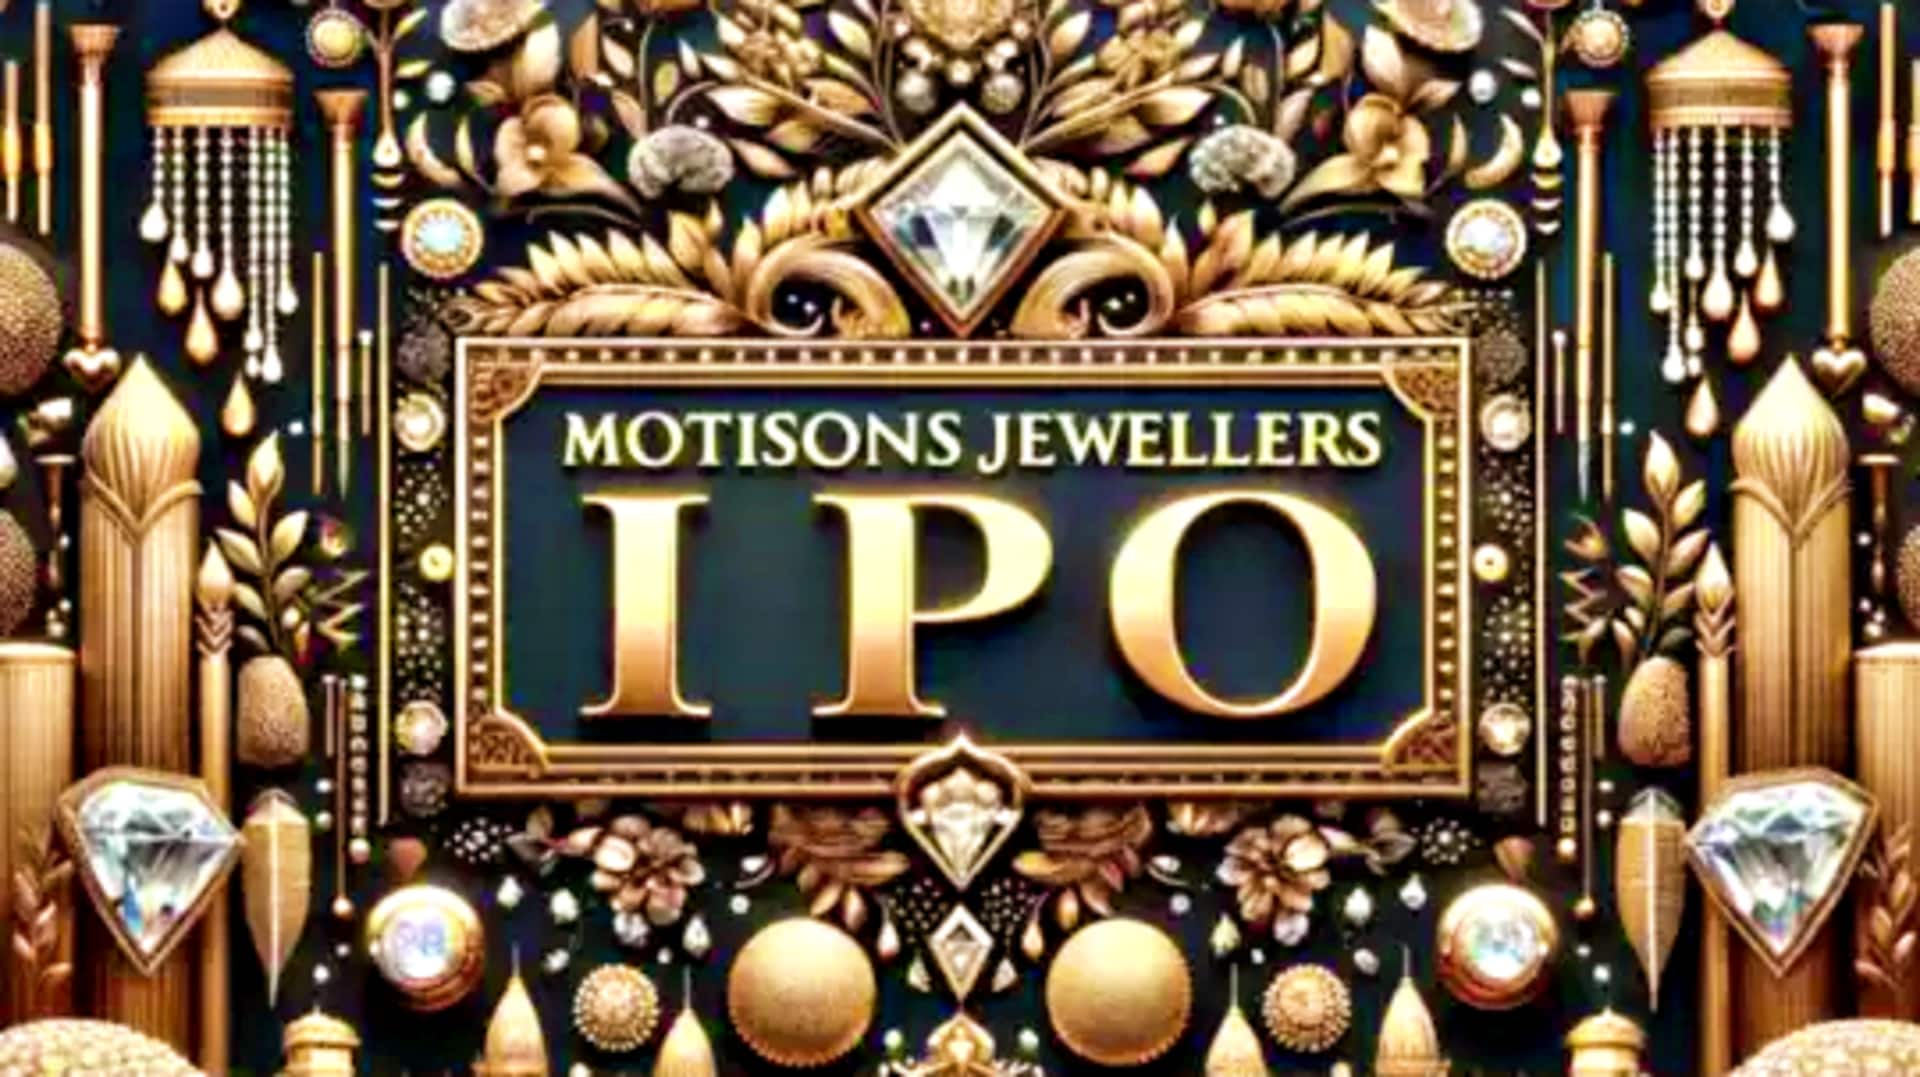 Motisons Jewellers IPO poised to yield substantial listing gains